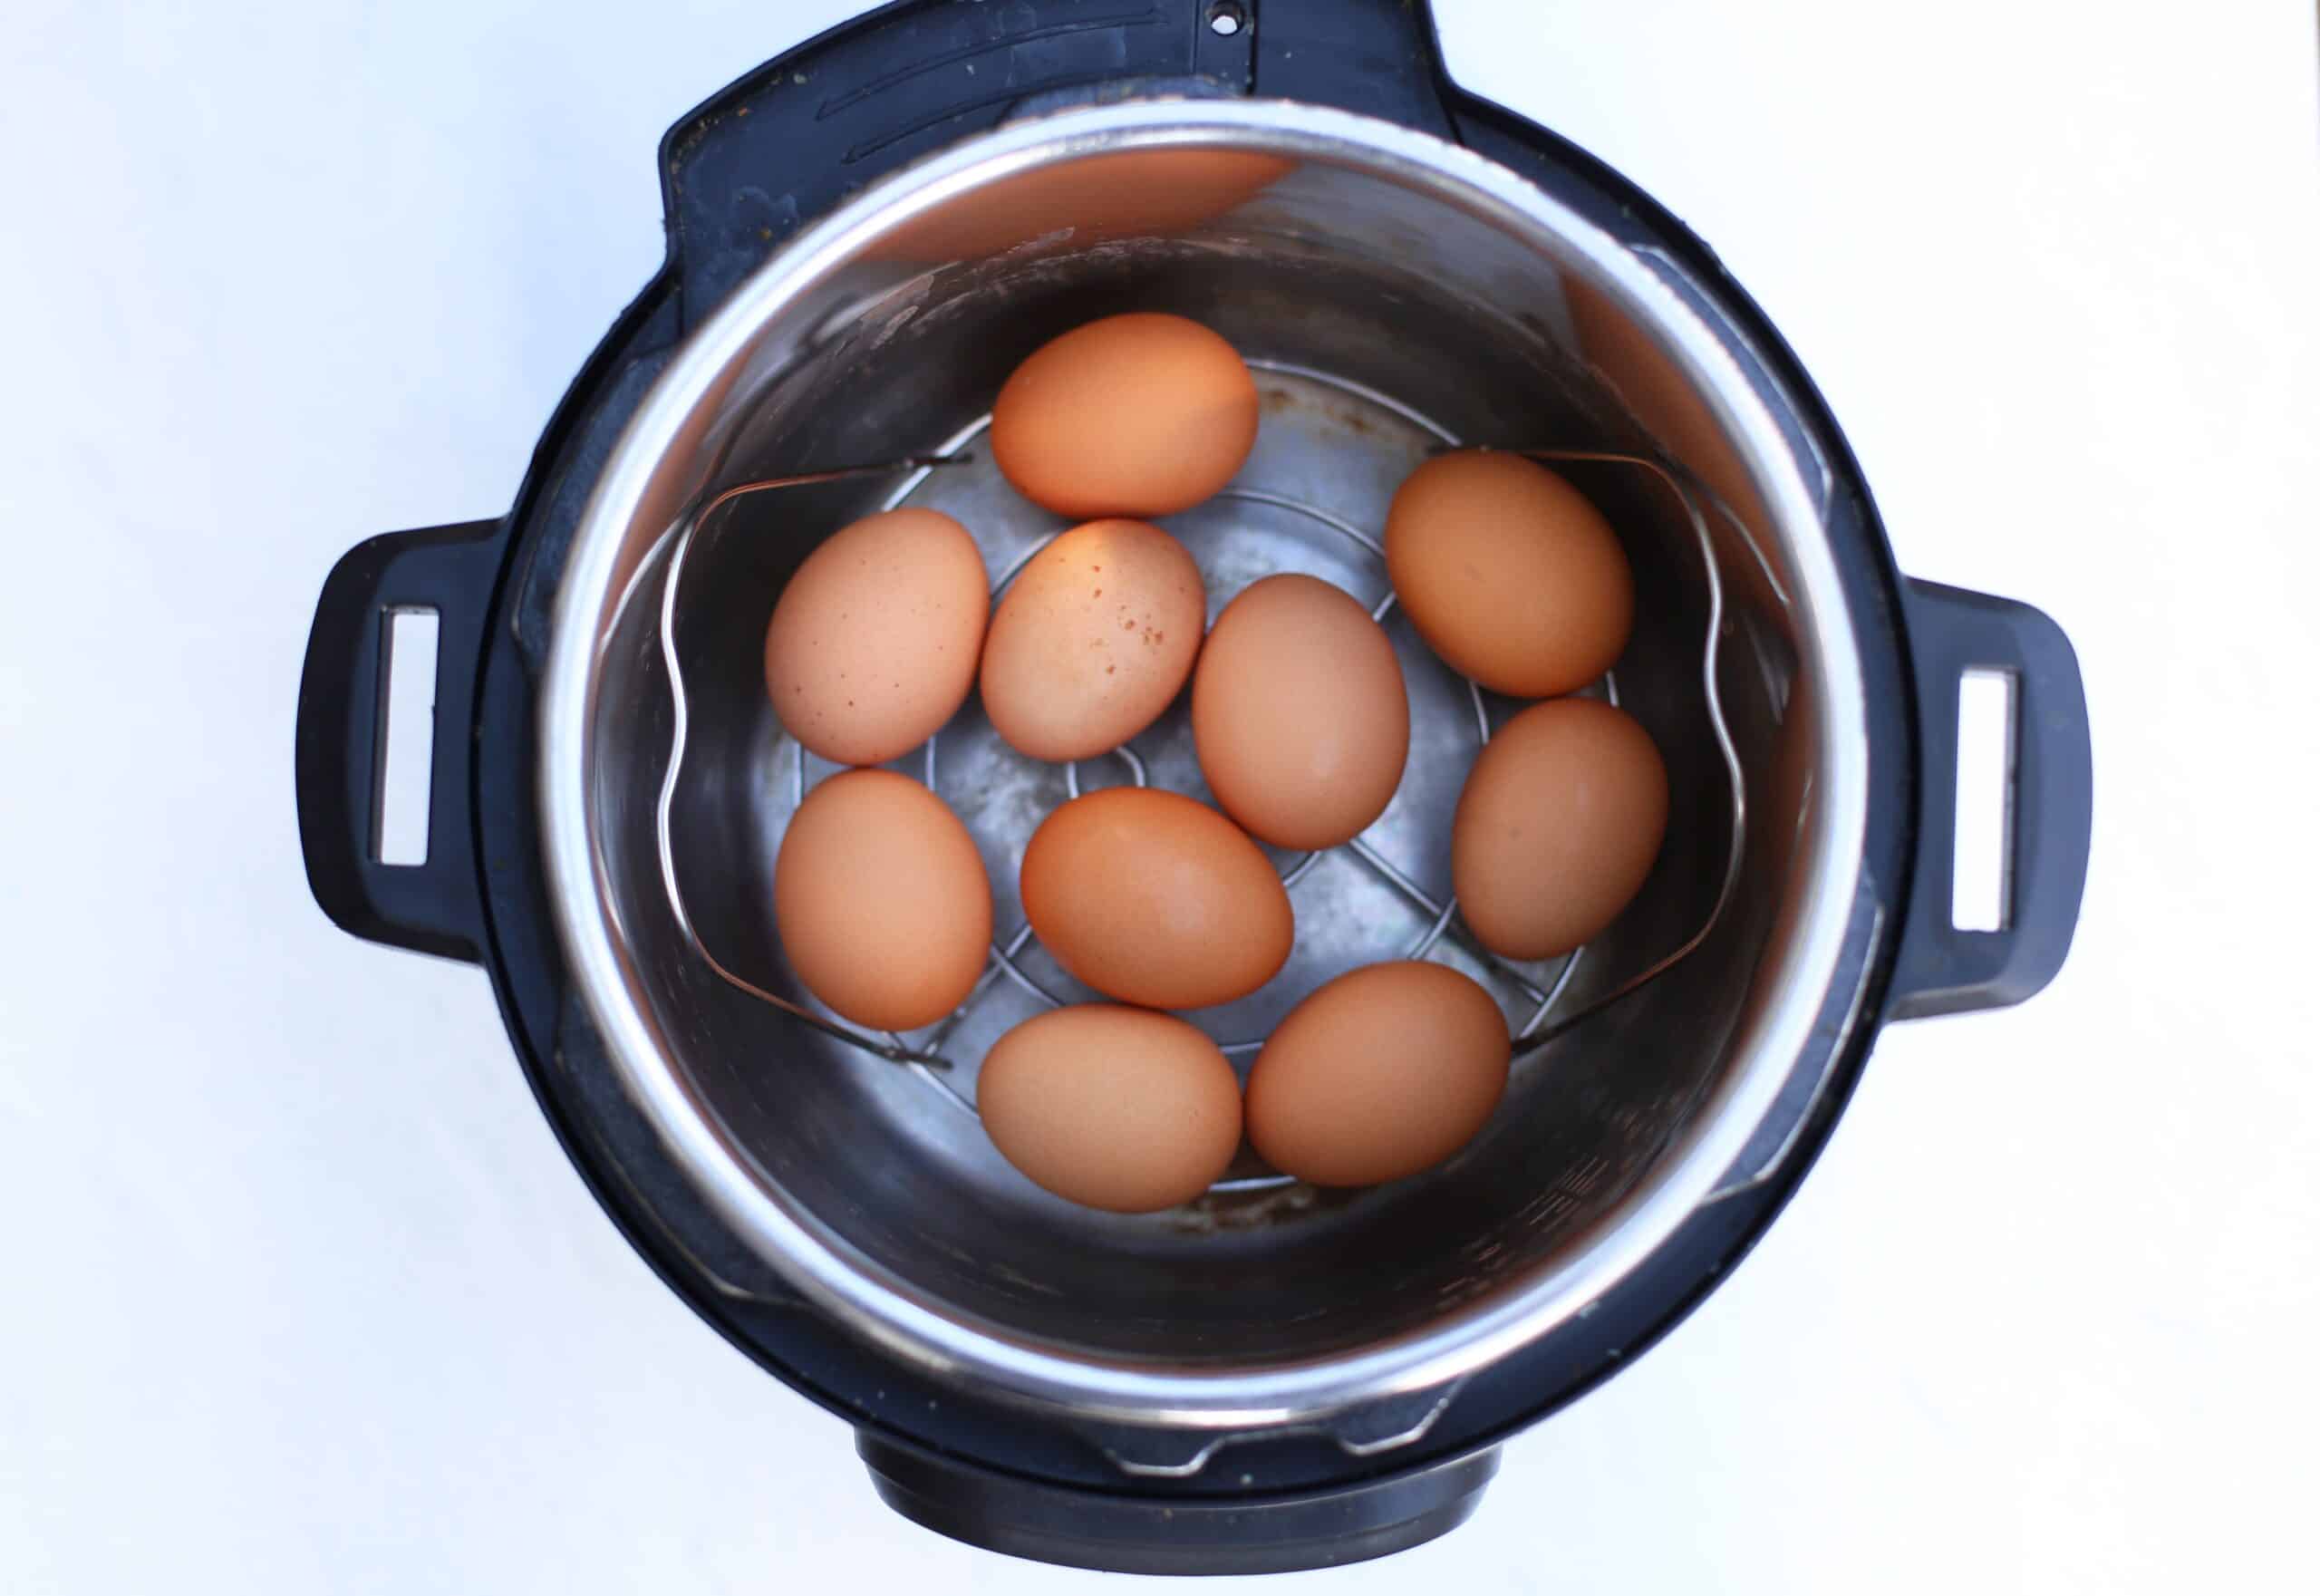 Instant Pot Hard Boiled Eggs - Plowing Through Life